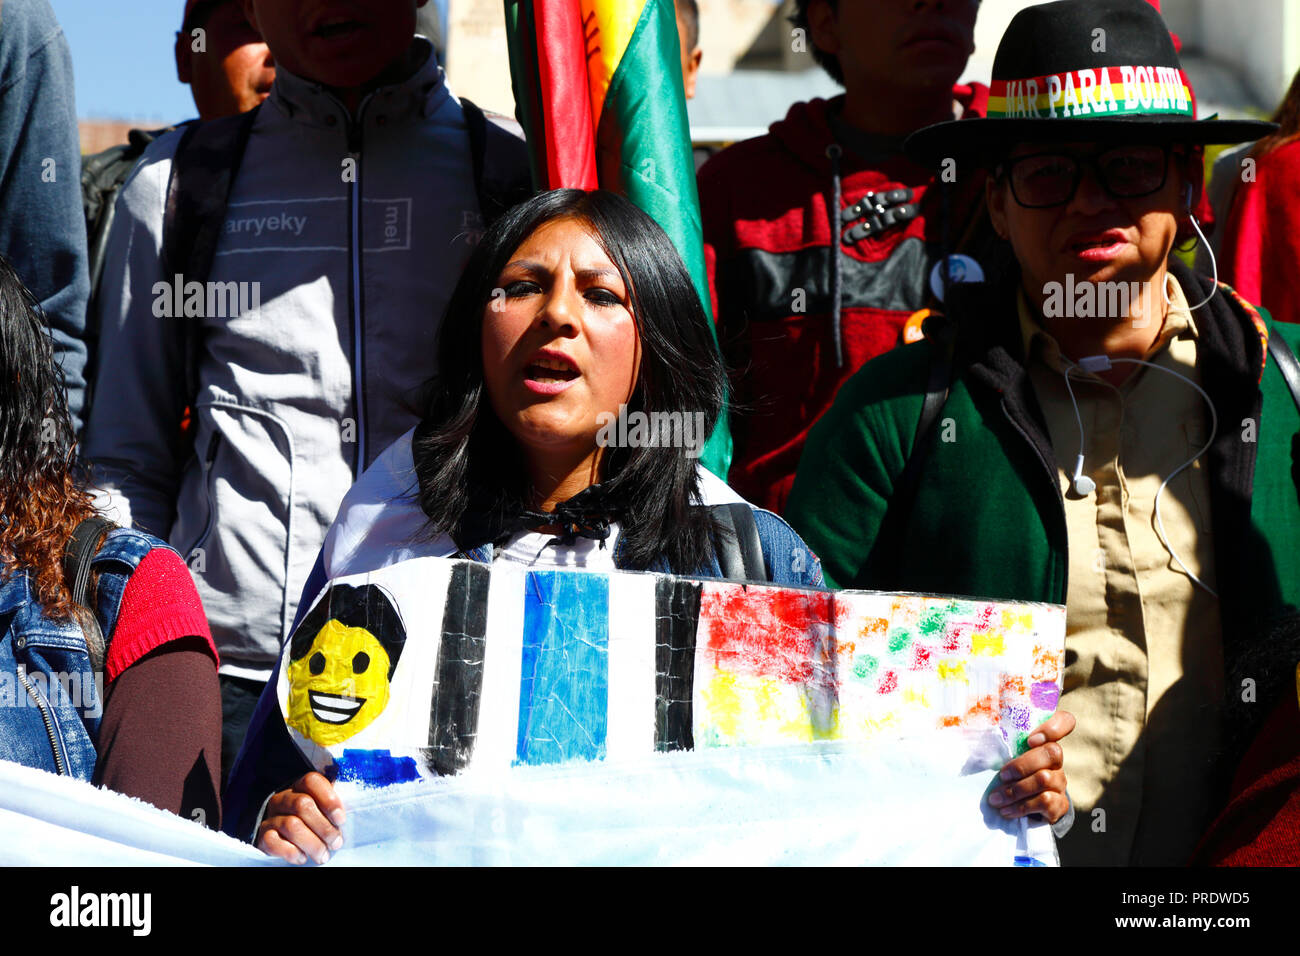 La Paz, Bolivia, 1st October 2018. A member of the Generation Evo youth movement chants 'Mar Para Bolivia / Sea For Bolivia' during the reading of the ruling for the case 'Obligation to Negotiate Access to the Pacific Ocean (Bolivia v. Chile)' at the International Court of Justice in The Hague. Bolivia presented the case to the ICJ in 2013; Bolivia lost its coastal Litoral province to Chile during the War of the Pacific (1879-1884) and previous negotiations have made no progress from Bolivia's viewpoint. Credit: James Brunker/Alamy Live News Stock Photo